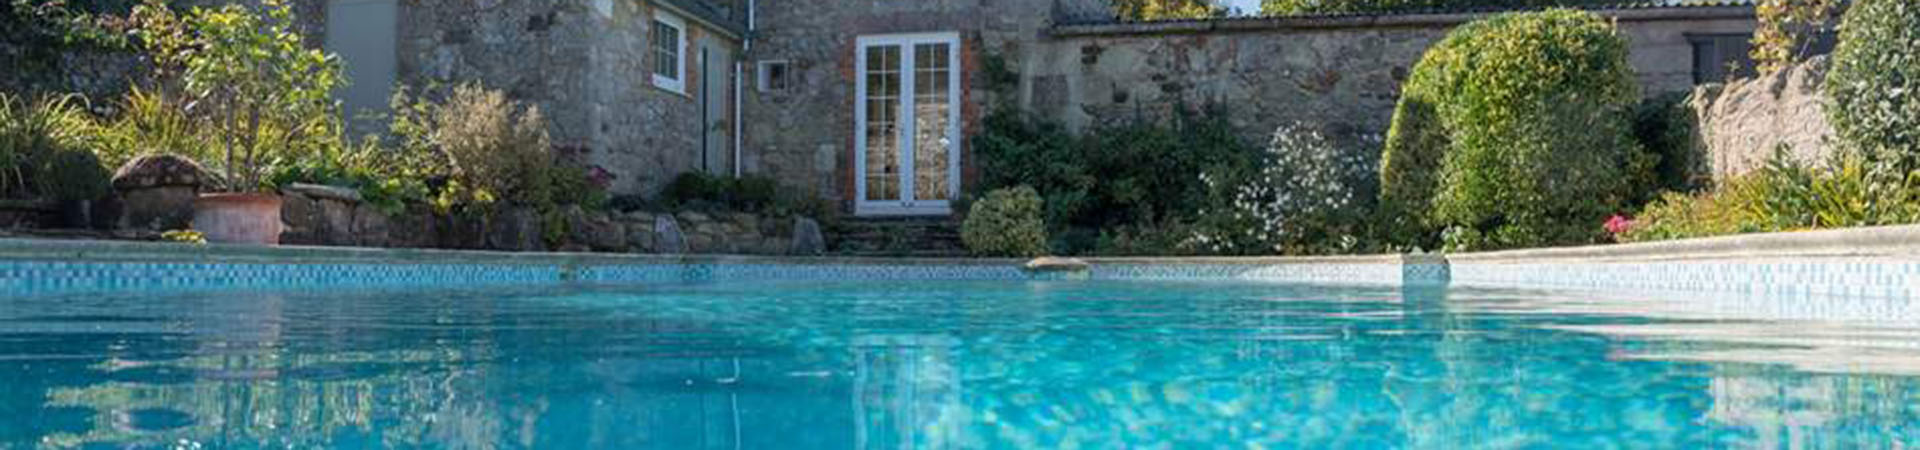 Holiday cottages with pools in South Devon